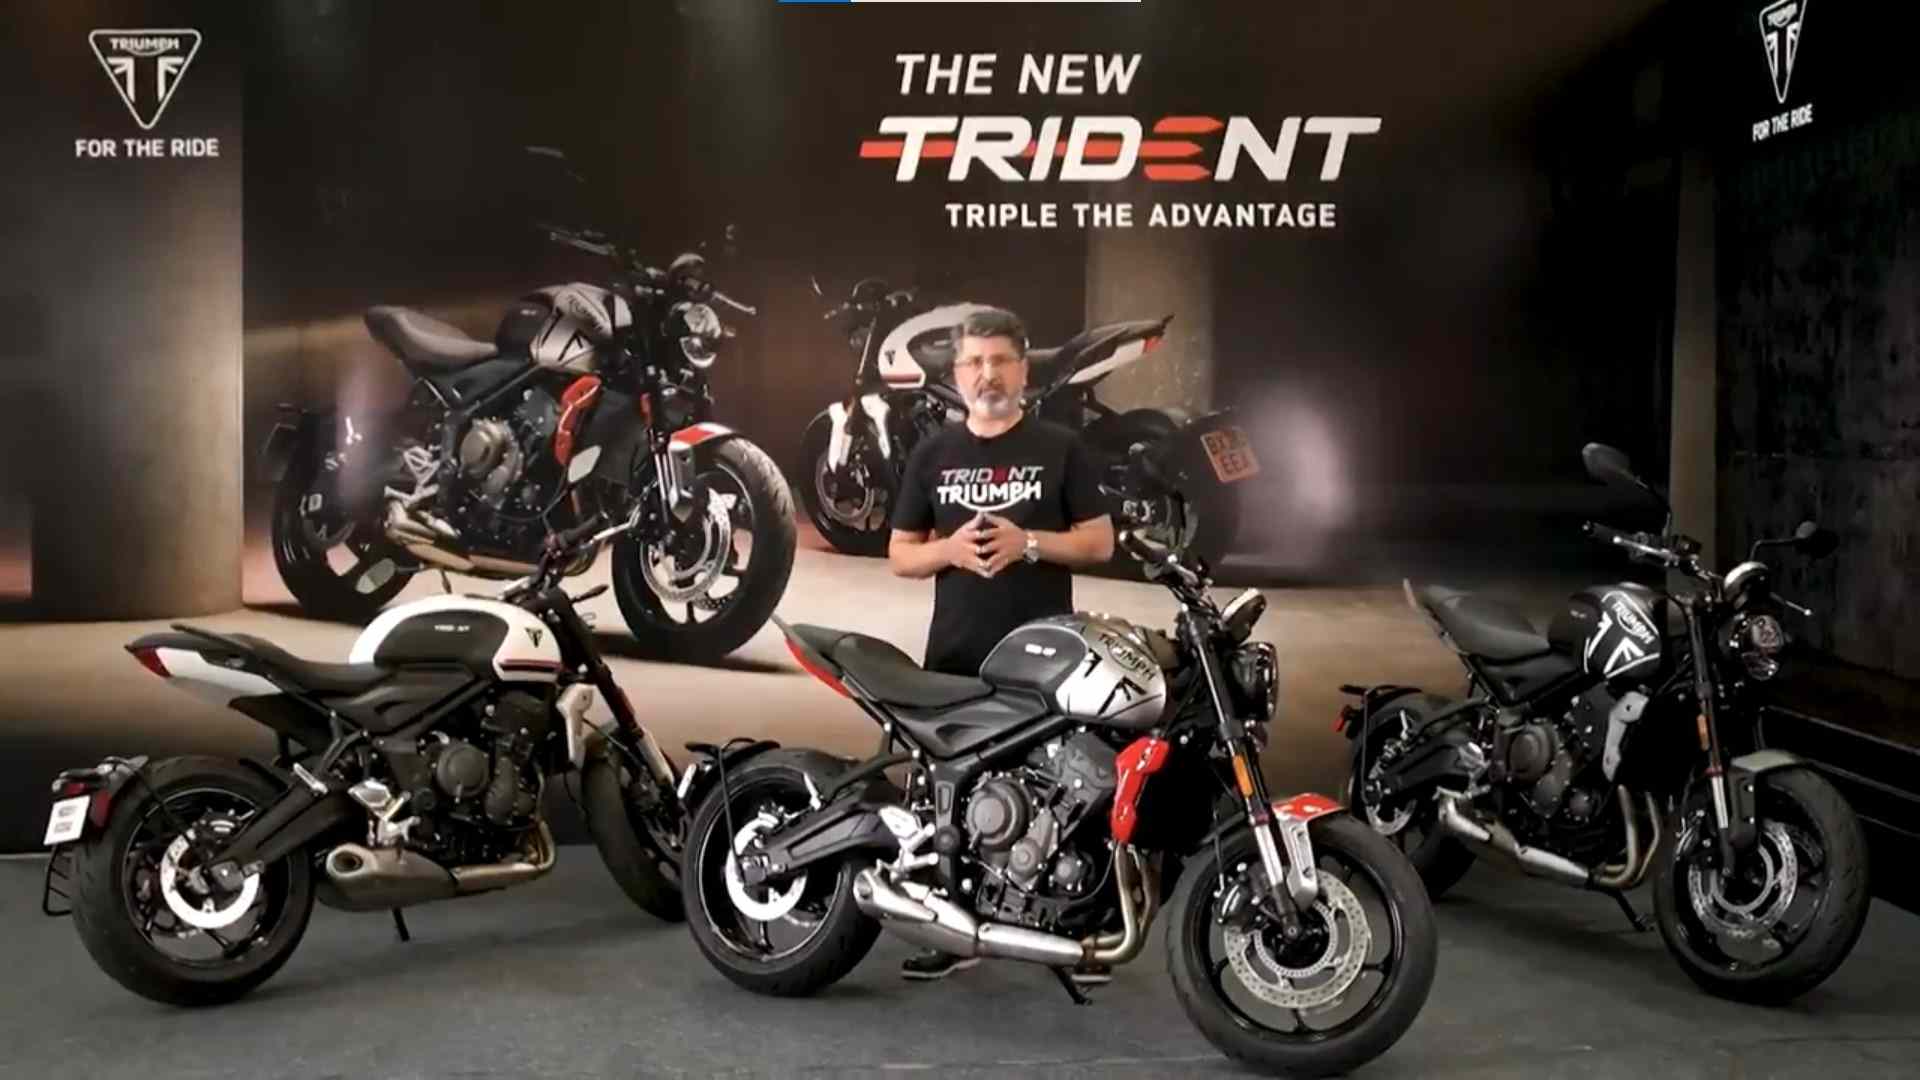  Triumph Trident 660 launched in India at an introductory starting price of Rs 6.95 lakh